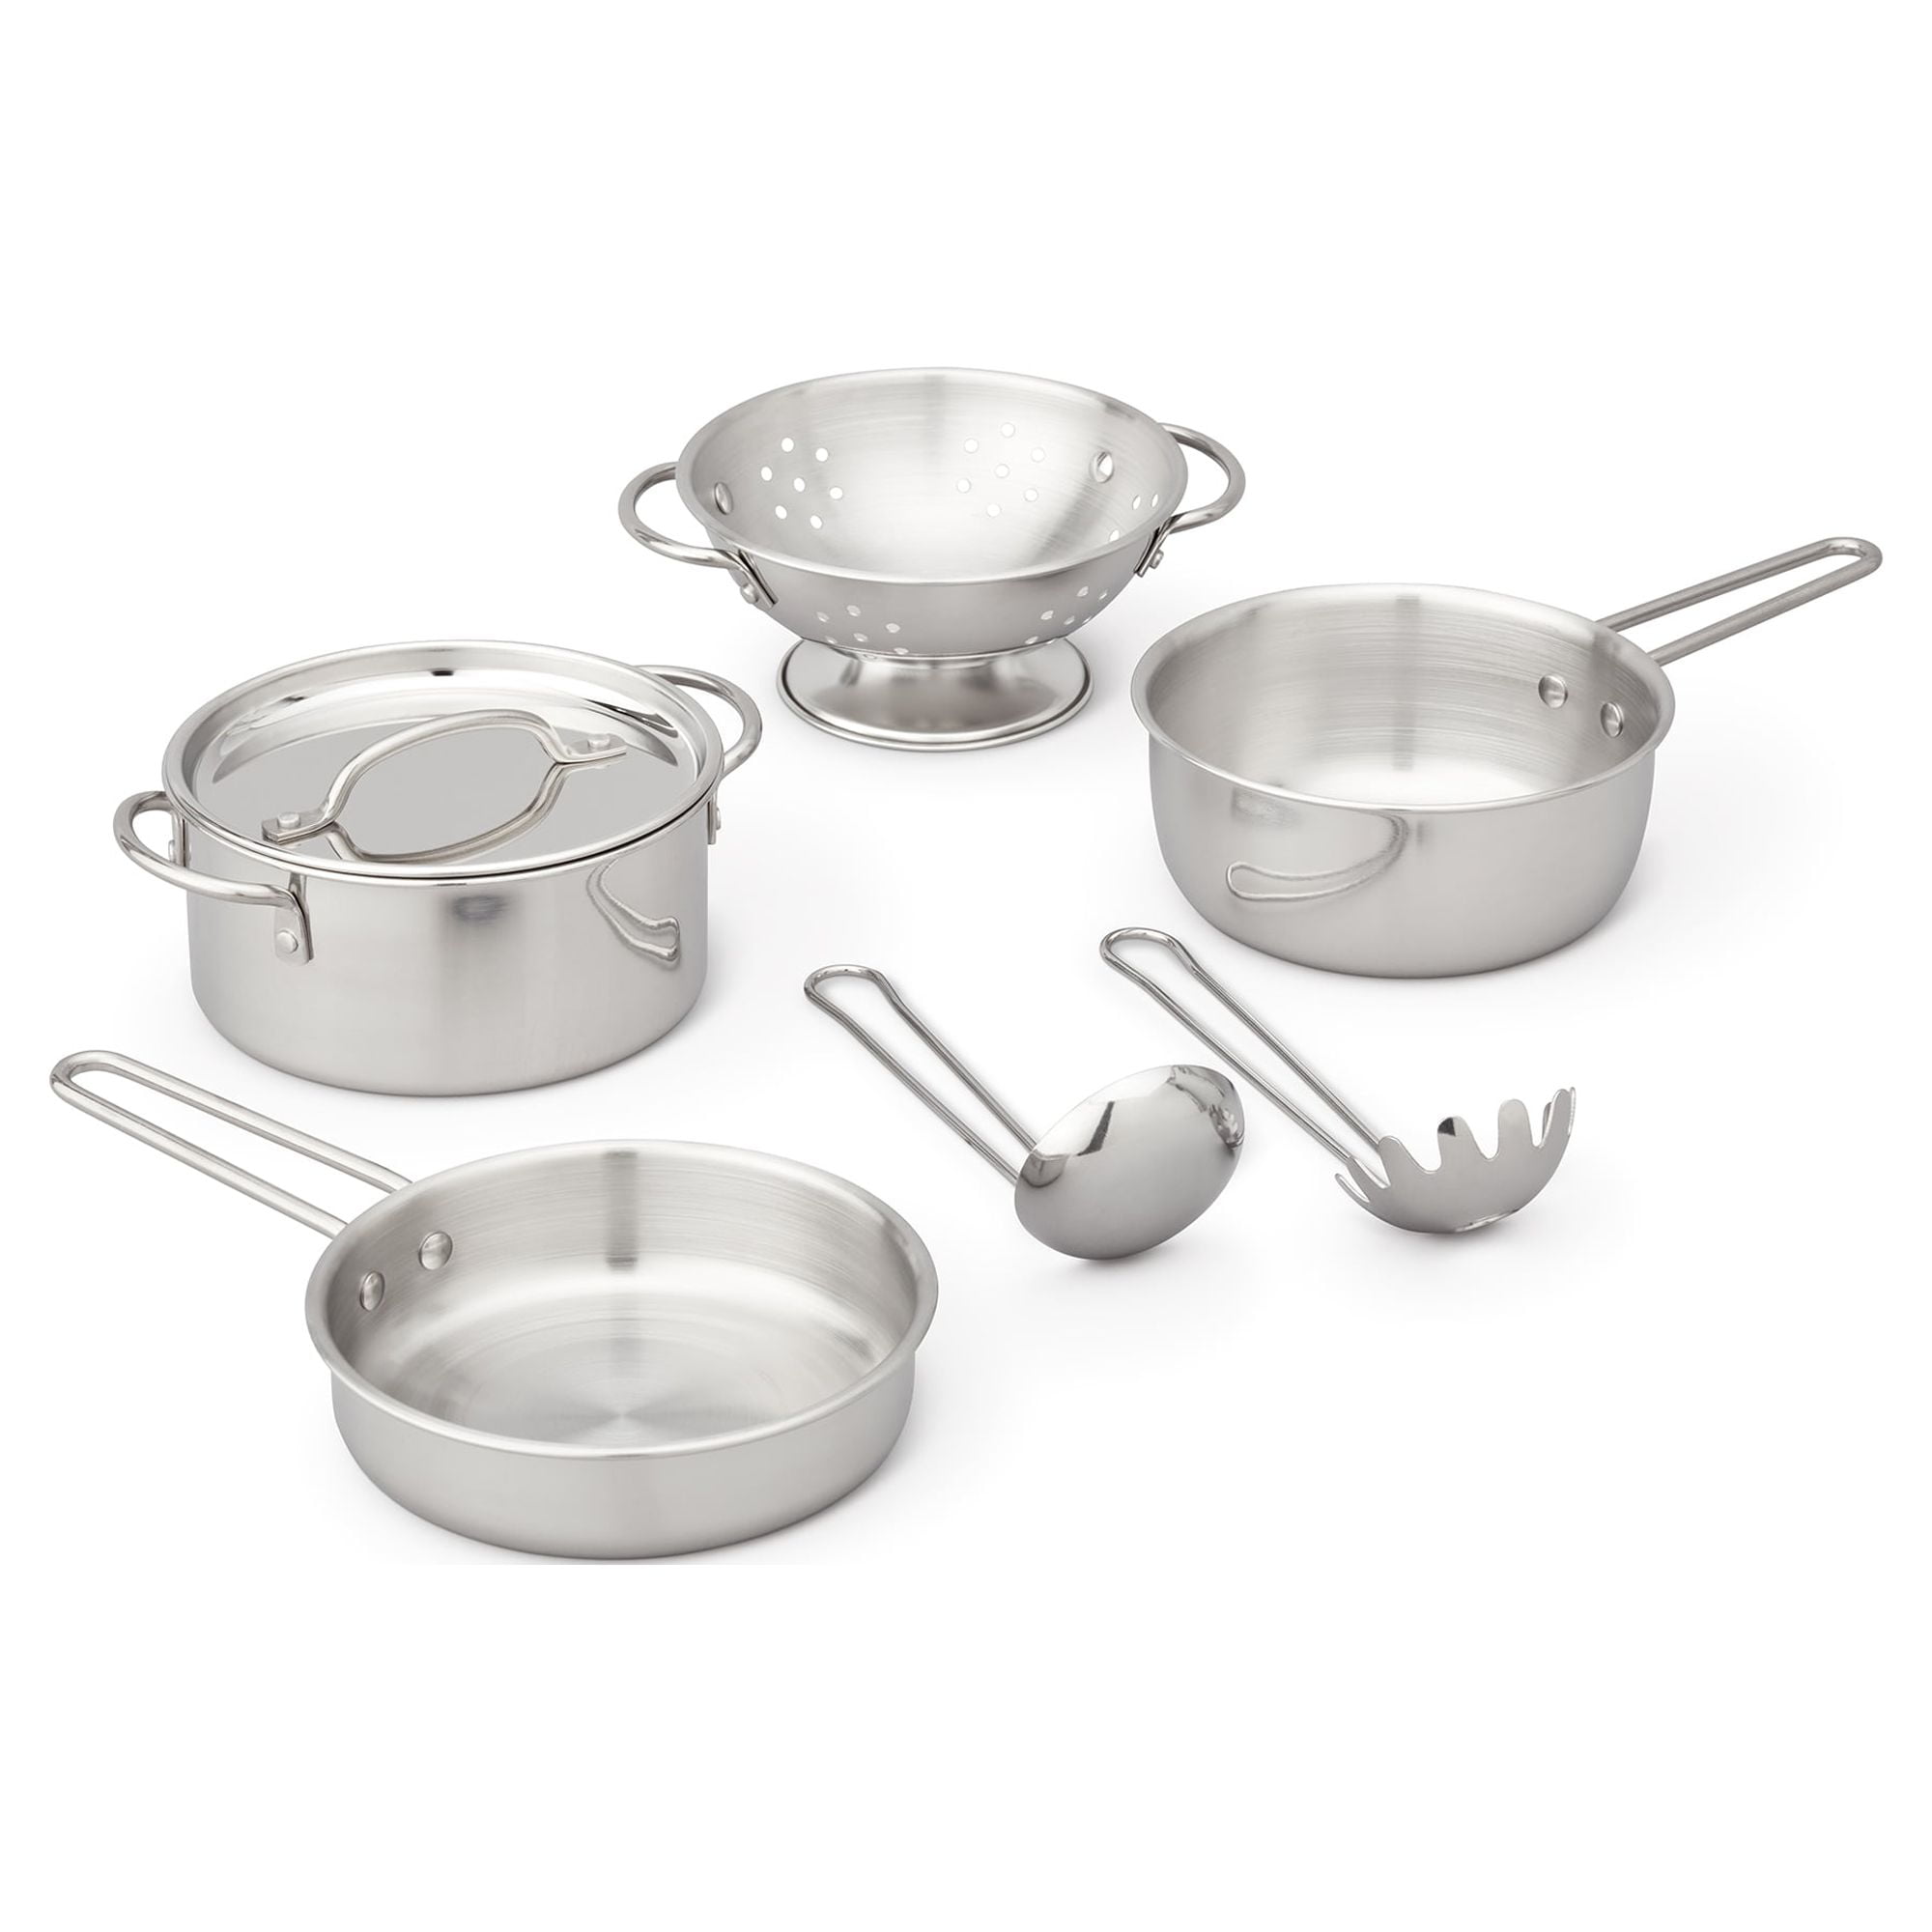 Melissa & Doug 8-Piece Stainless Steel What’s Cooking Pots and Pans Restaurant and Kitchen Play Set